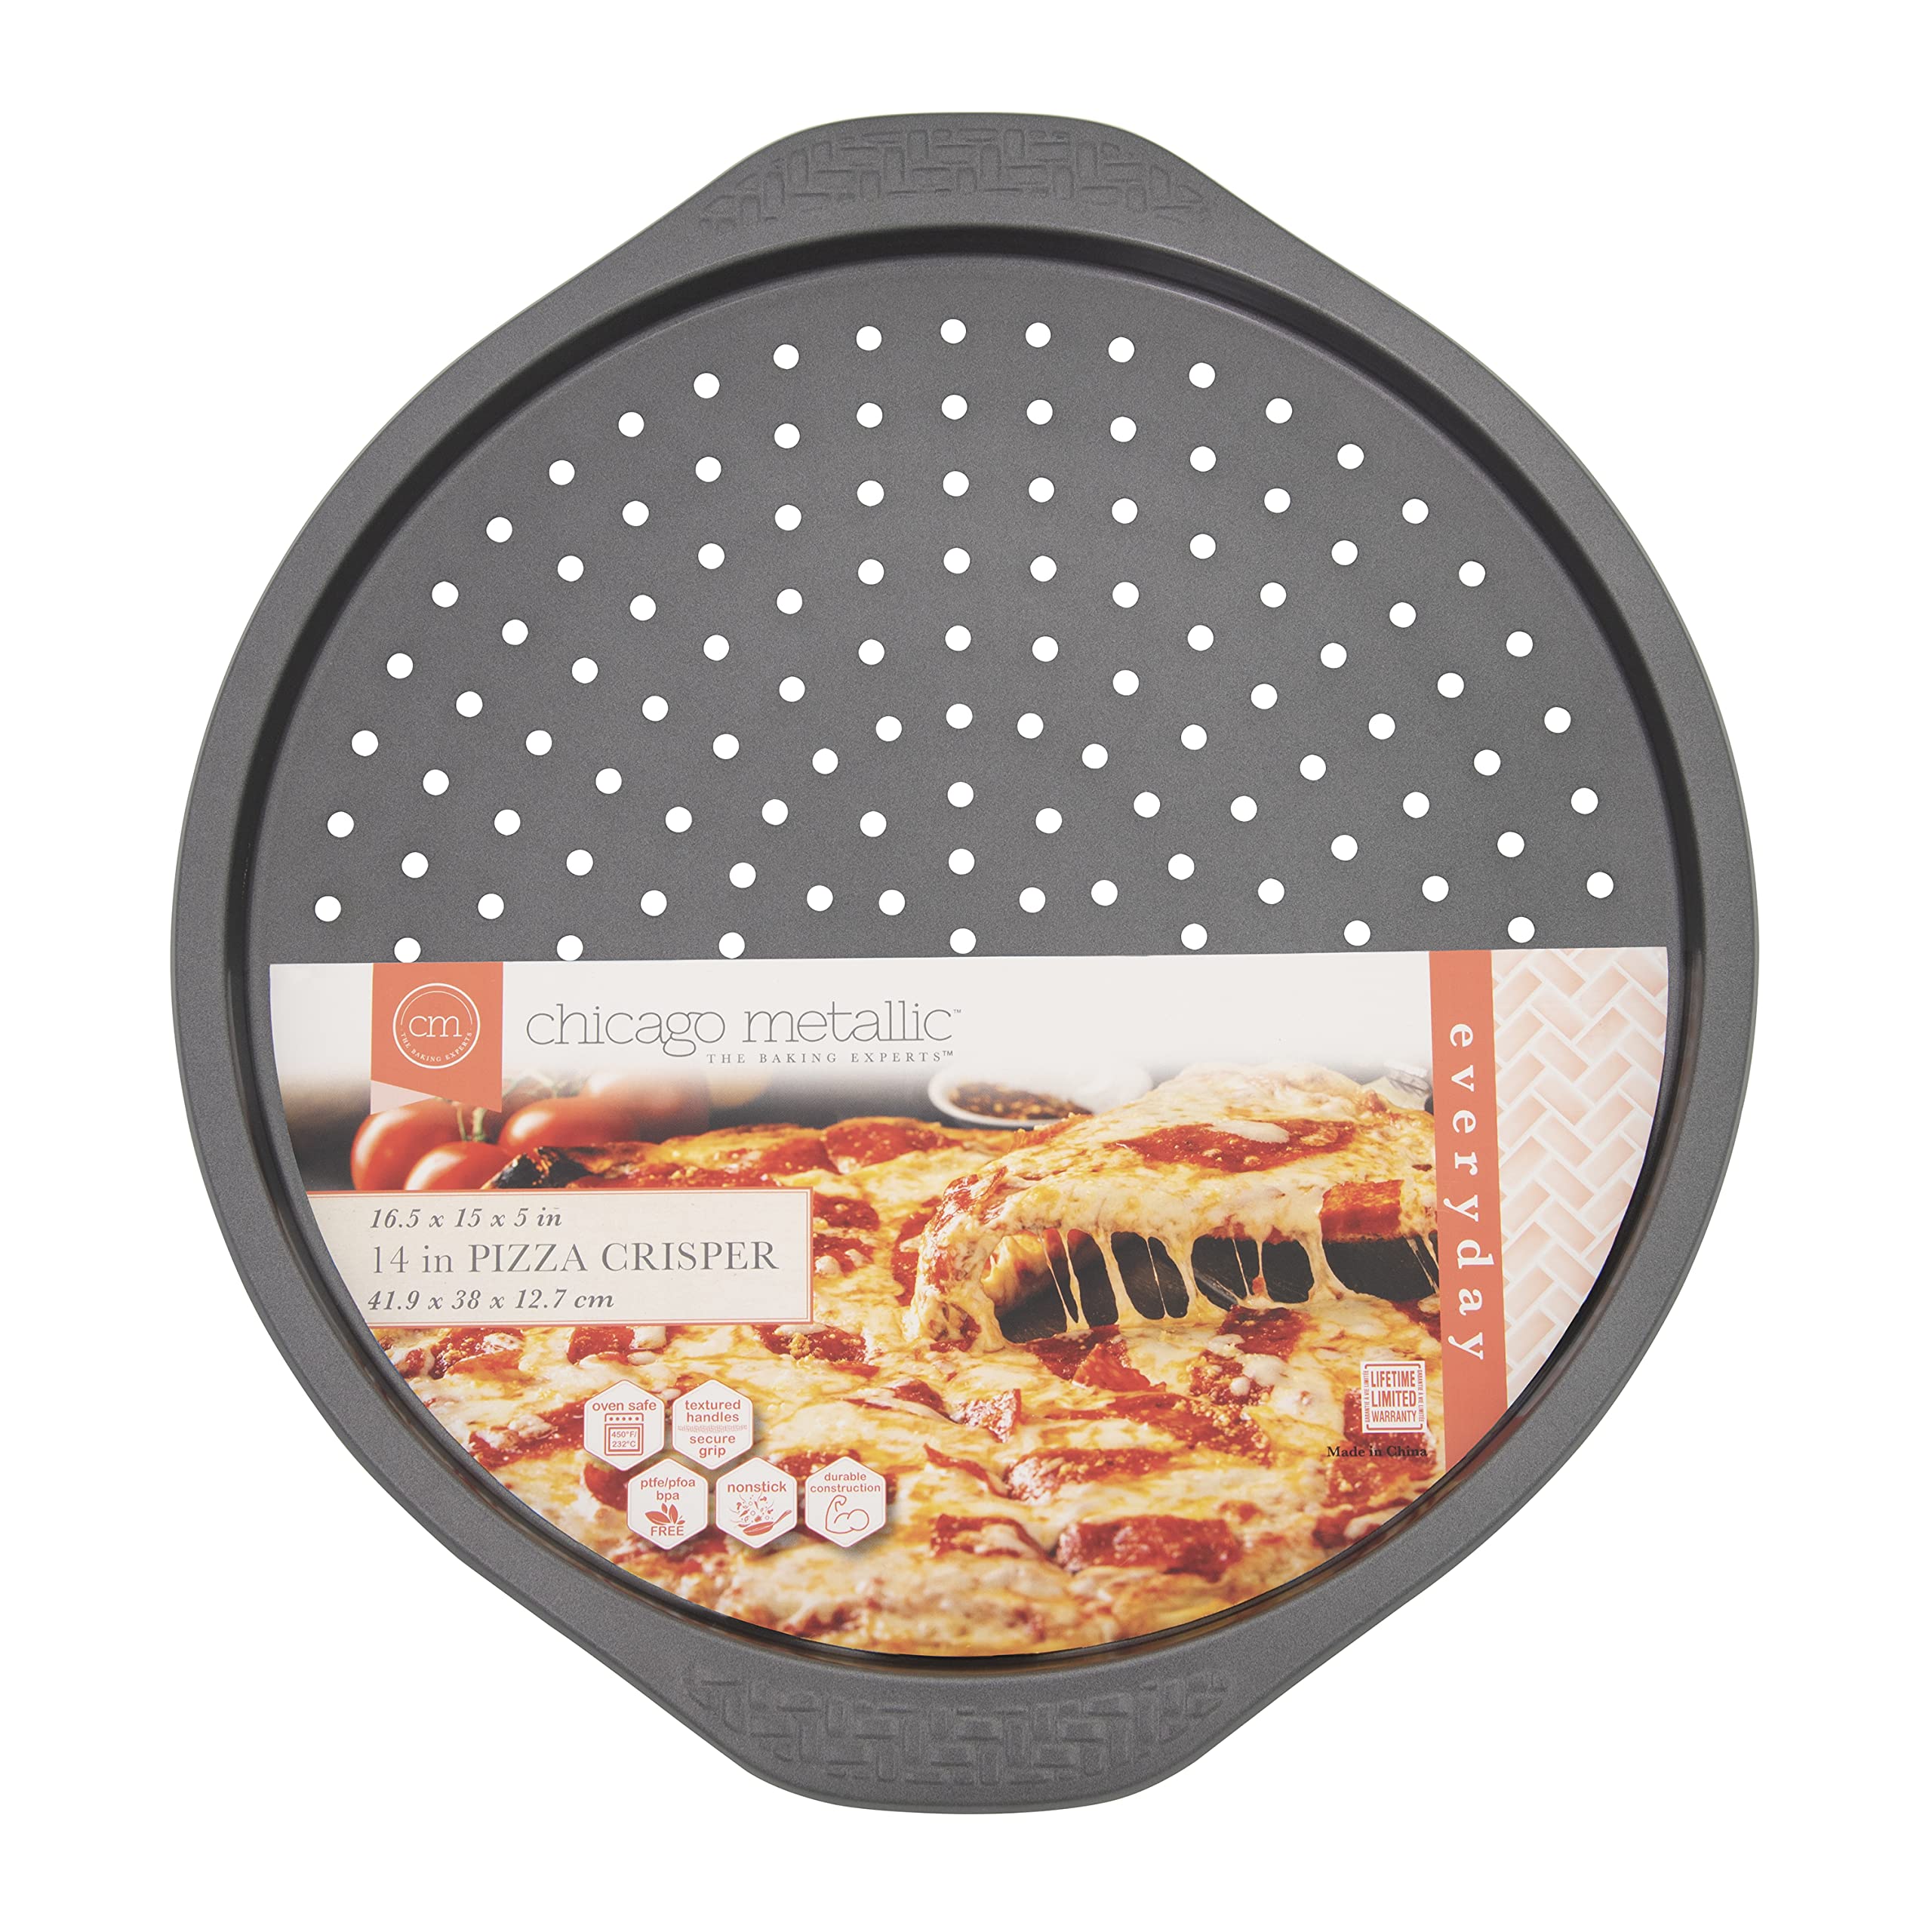 Chicago Metallic Everyday Non-Stick Pizza Crisper. Perfect for making homemade pizza, baking frozen treats reheating meals, and more